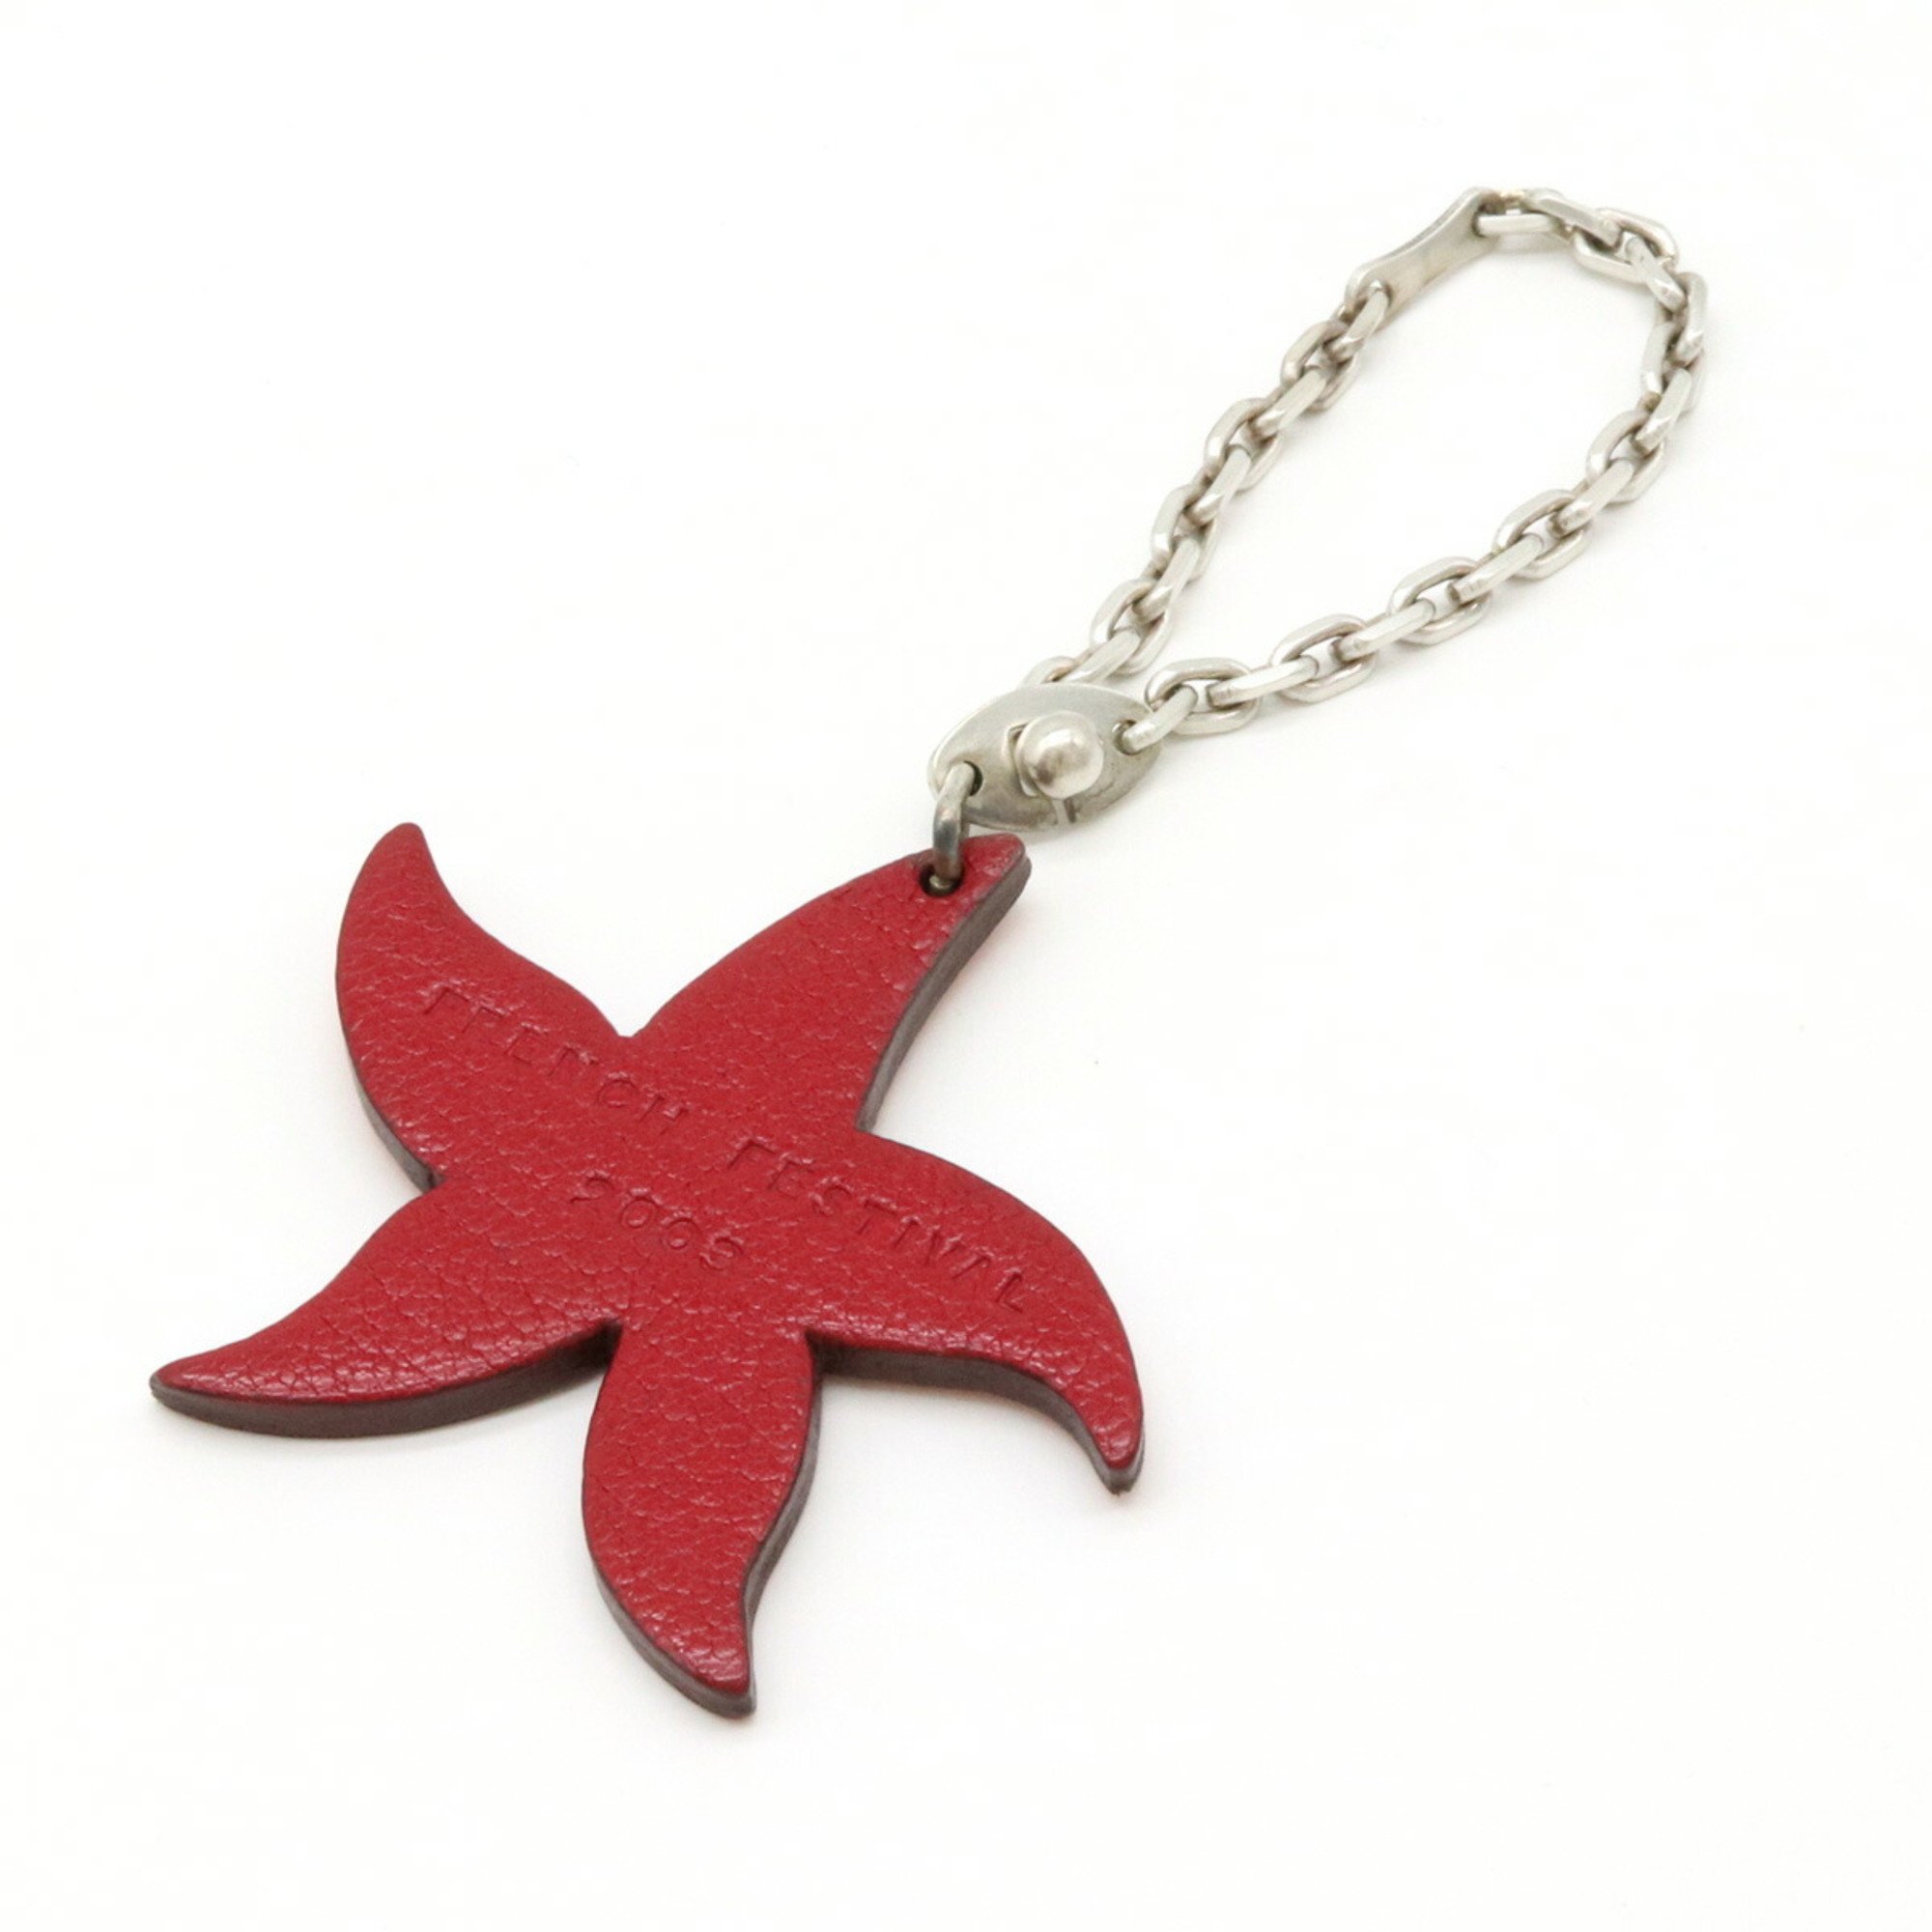 HERMES Hermes Bag Charm Key Holder Chain Starfish French Festival 2003 Limited Edition Leather Red Orange